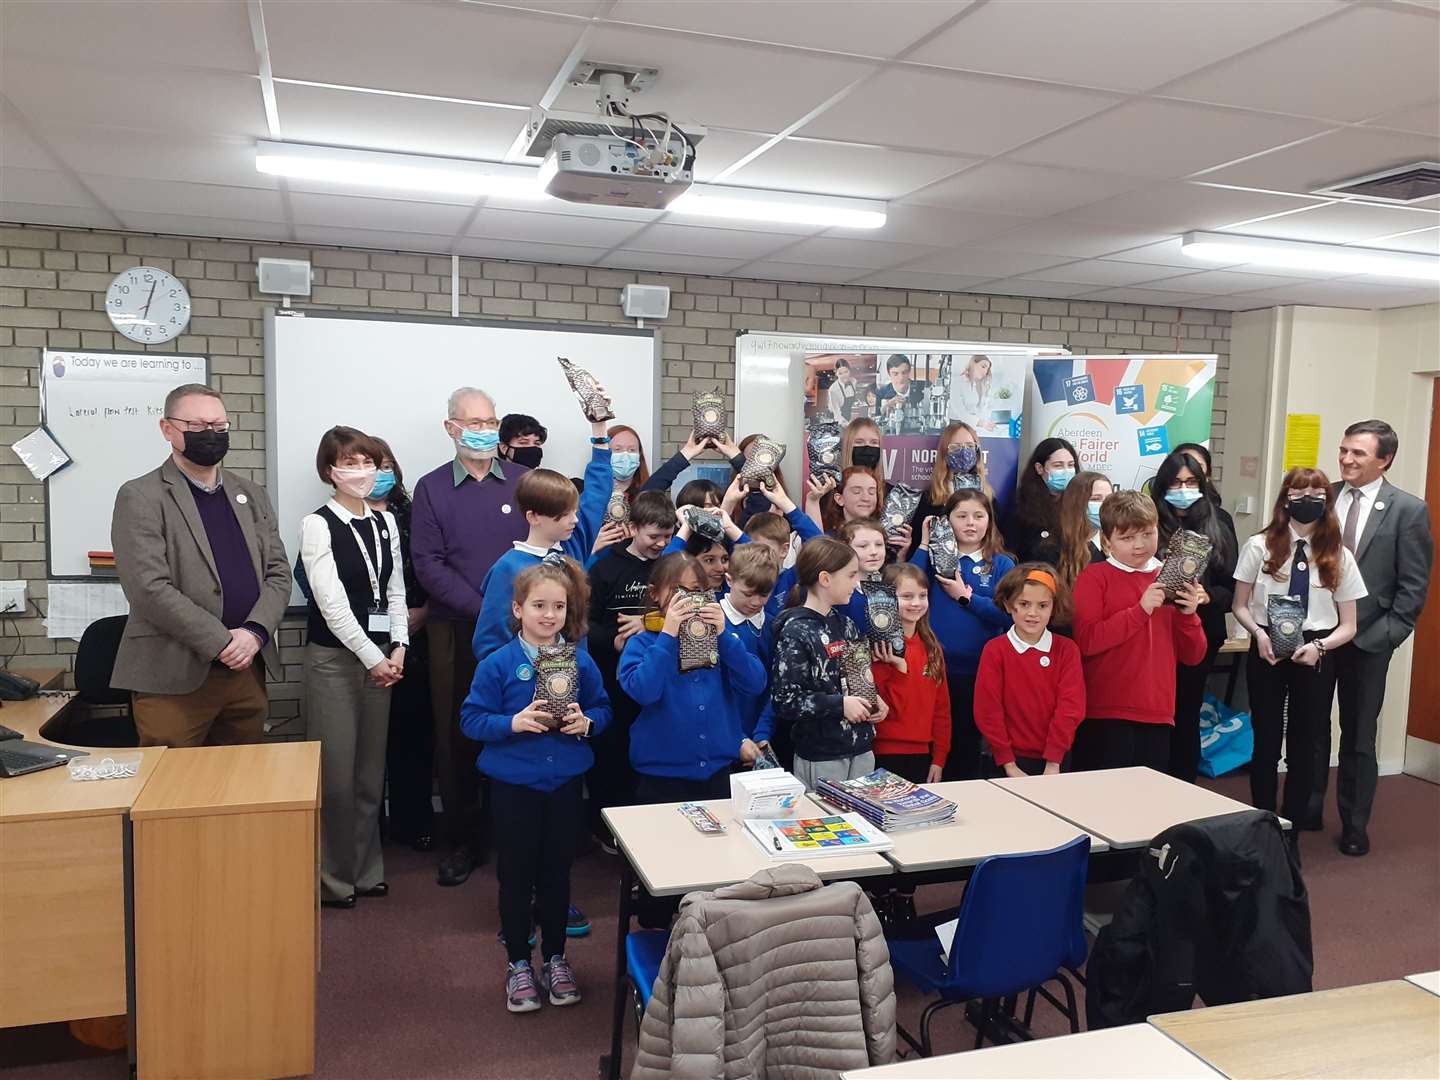 Richard Thomson MP (left) with pupils and teachers from Bridge of Don Academy, Scotstown Primary School and Braehead Primary School with members of Aberdeen for a Fairer World.